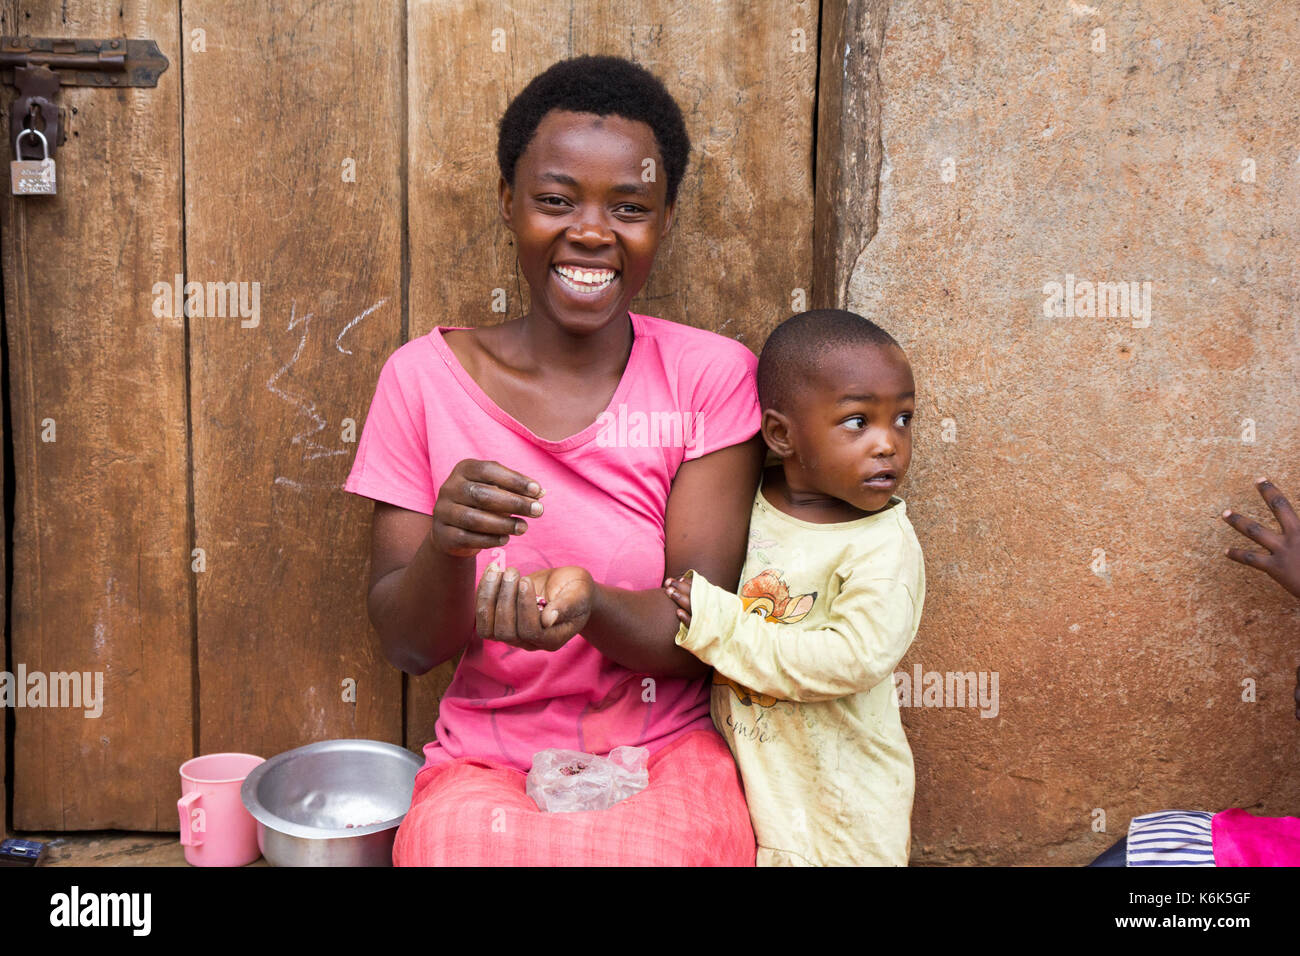 Lugazi, Uganda. 09 June 2017. A laughing African mother with a little child boy. The woman is sitting on door threshold sorting grains. Stock Photo